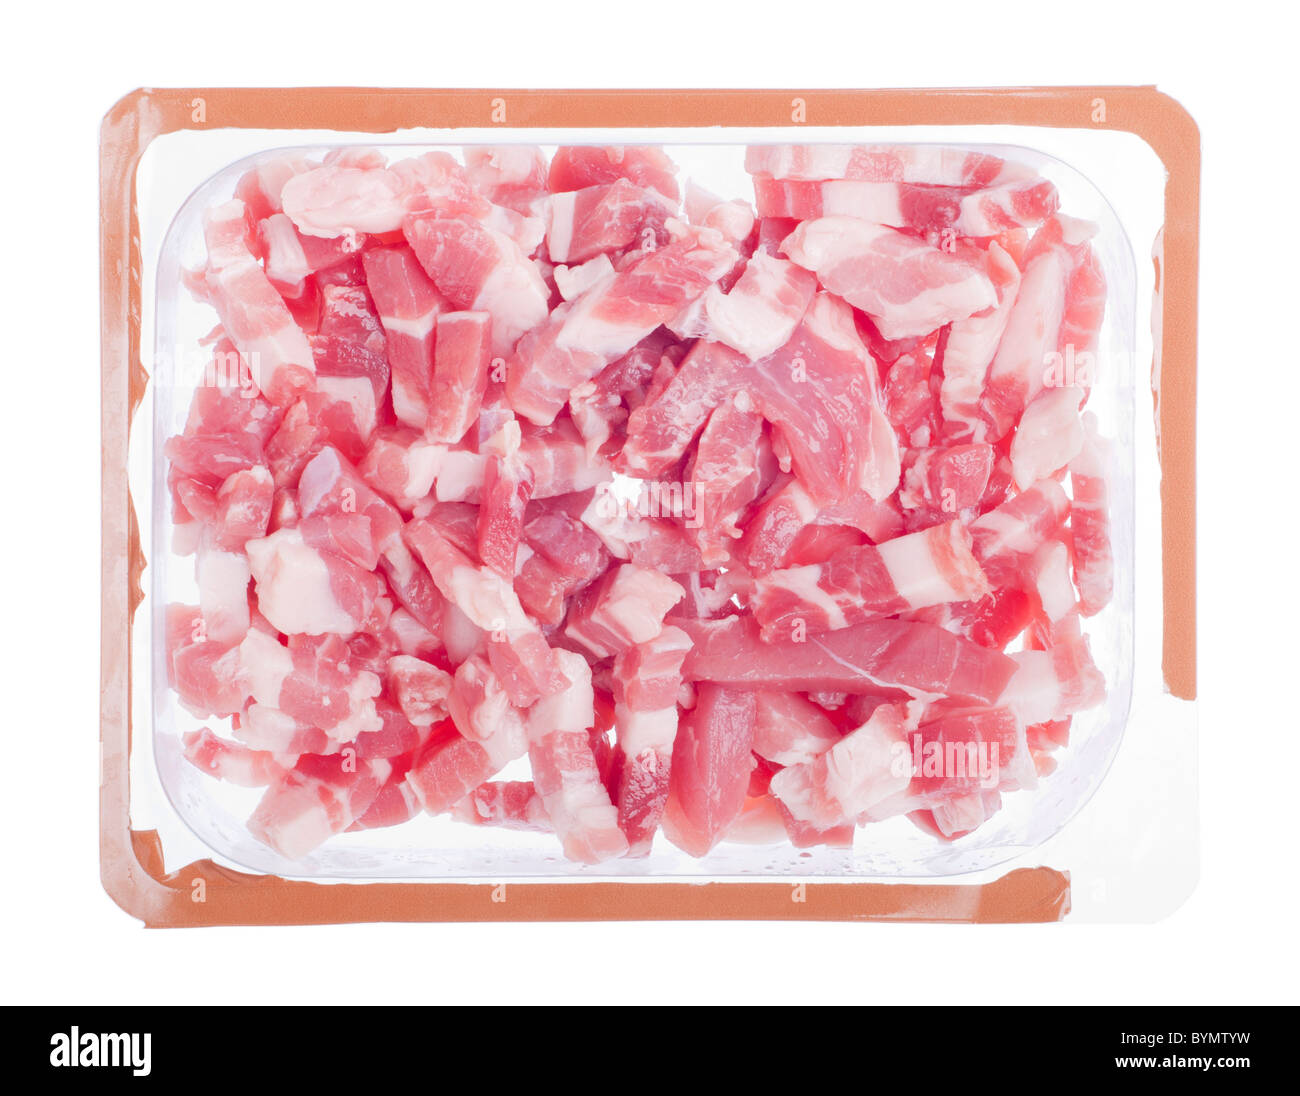 fresh bacon pieces on a plastic packaging tray isolated on white background Stock Photo